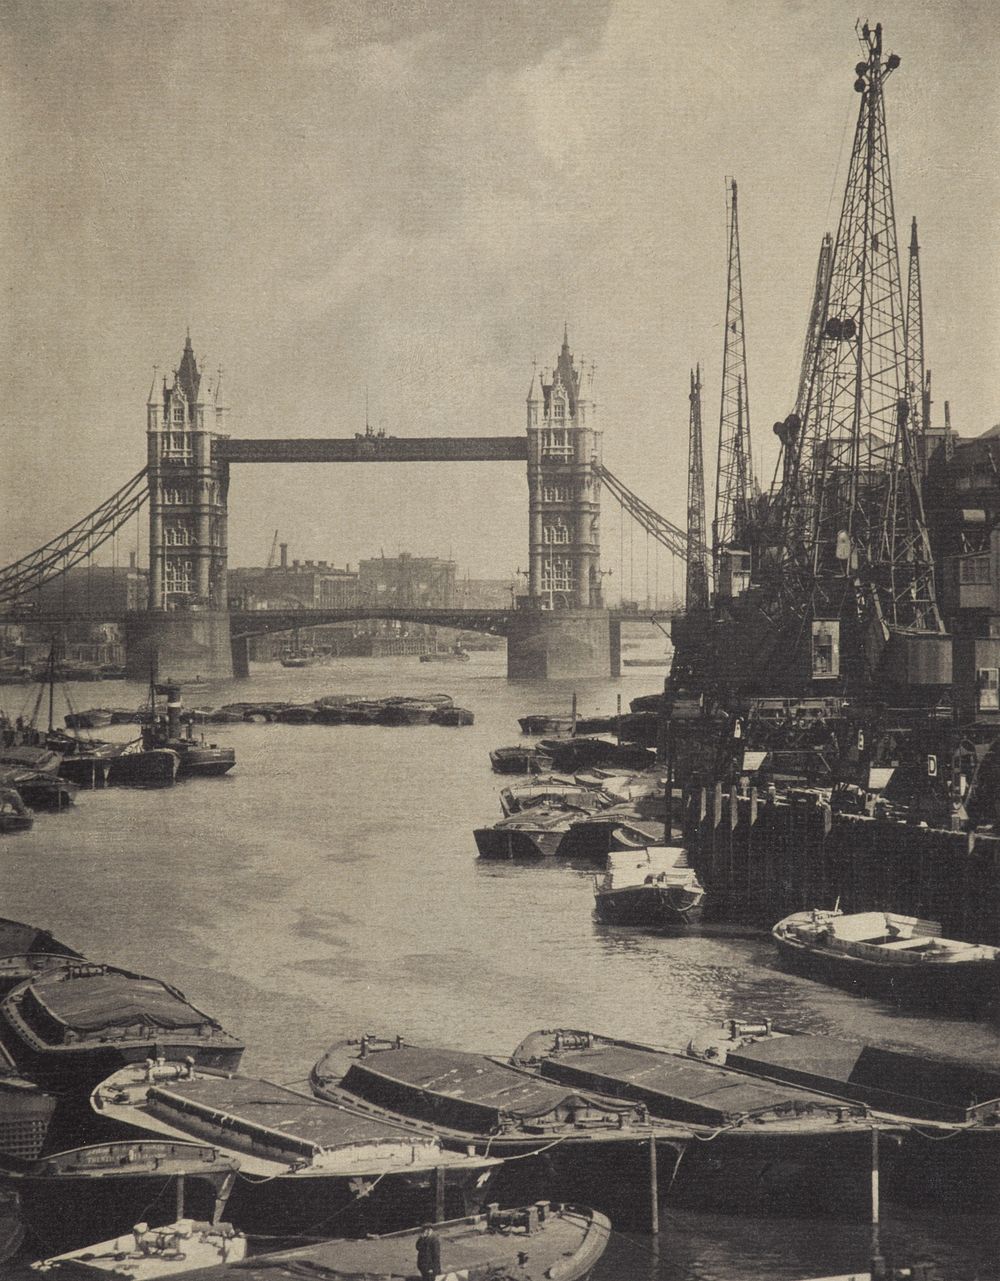 The pool and Tower Bridge. From the album: Photograph album - London (1920s) by Harry Moult.